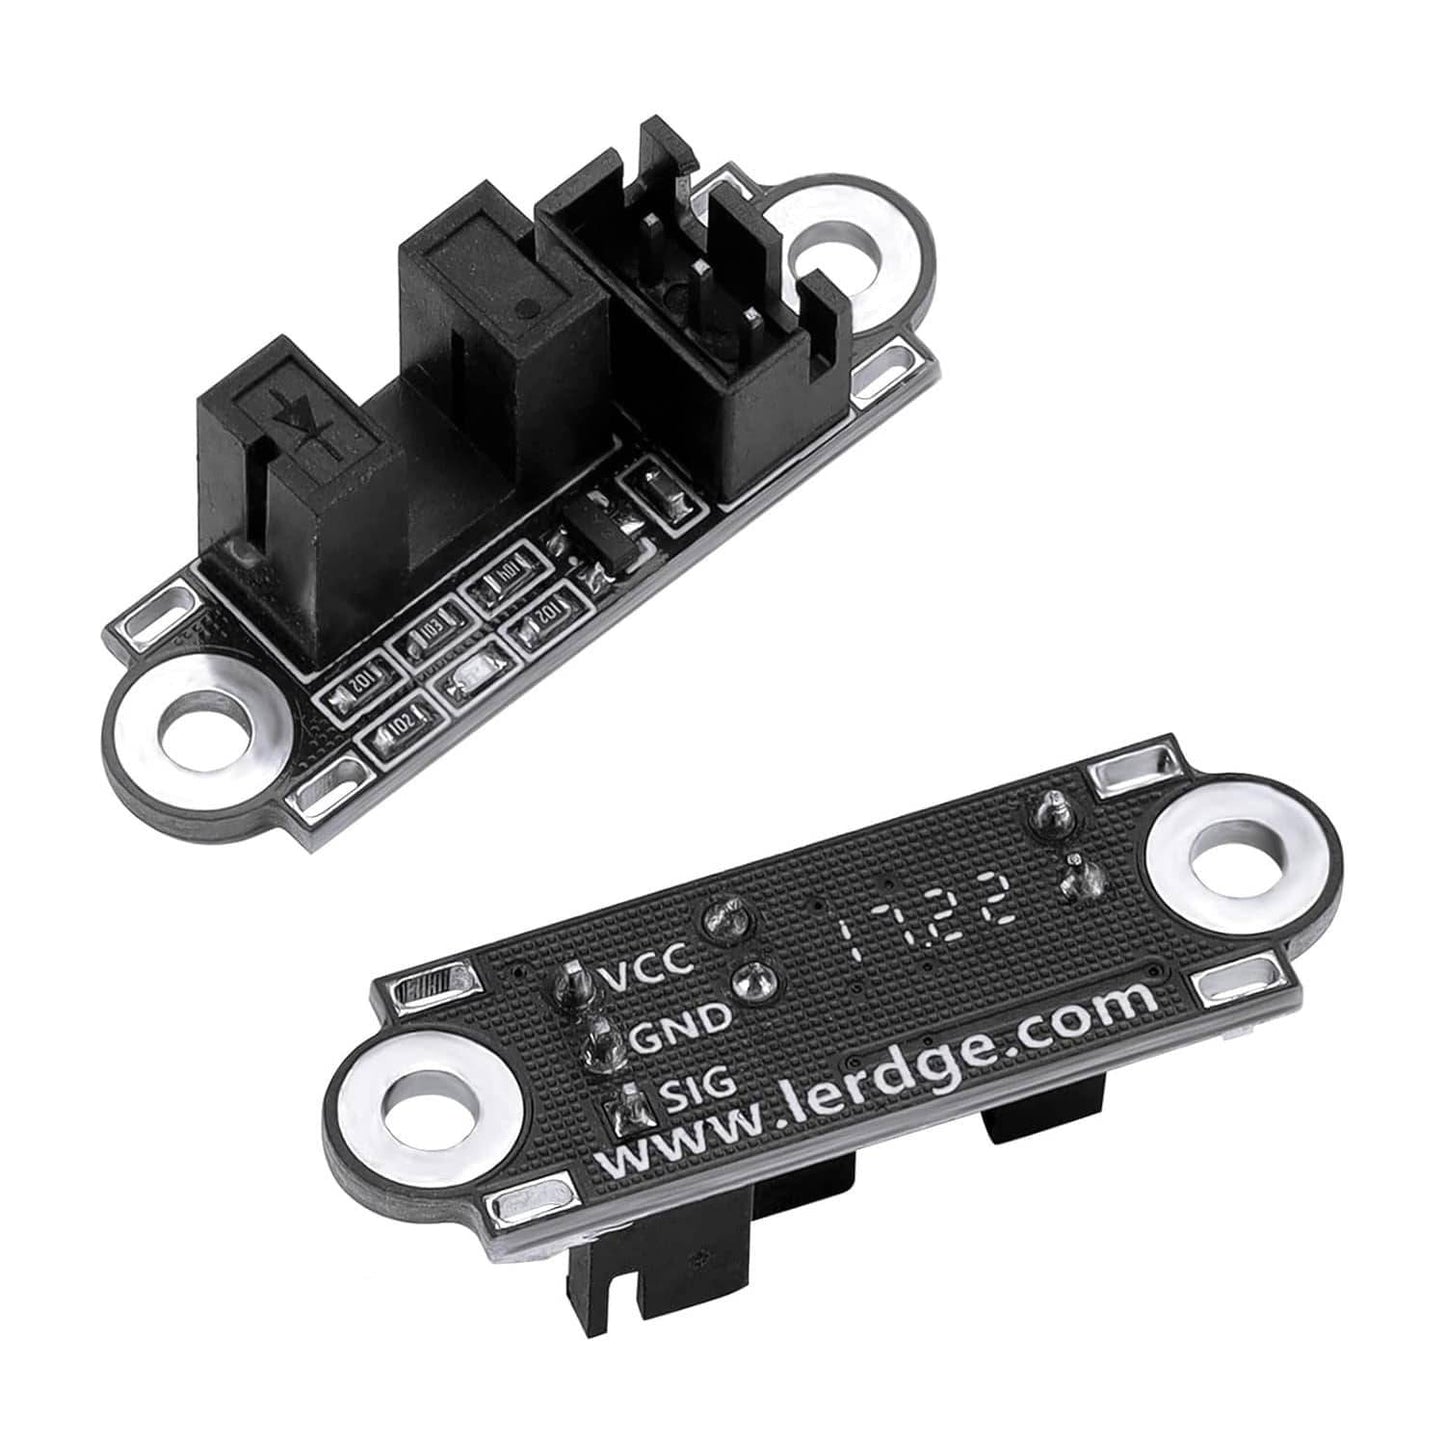 Endstop Switch Optical Endstop Photoelectric Light Control Optical Limit Switch for 3D Printer - RS2702/RS3801 - REES52